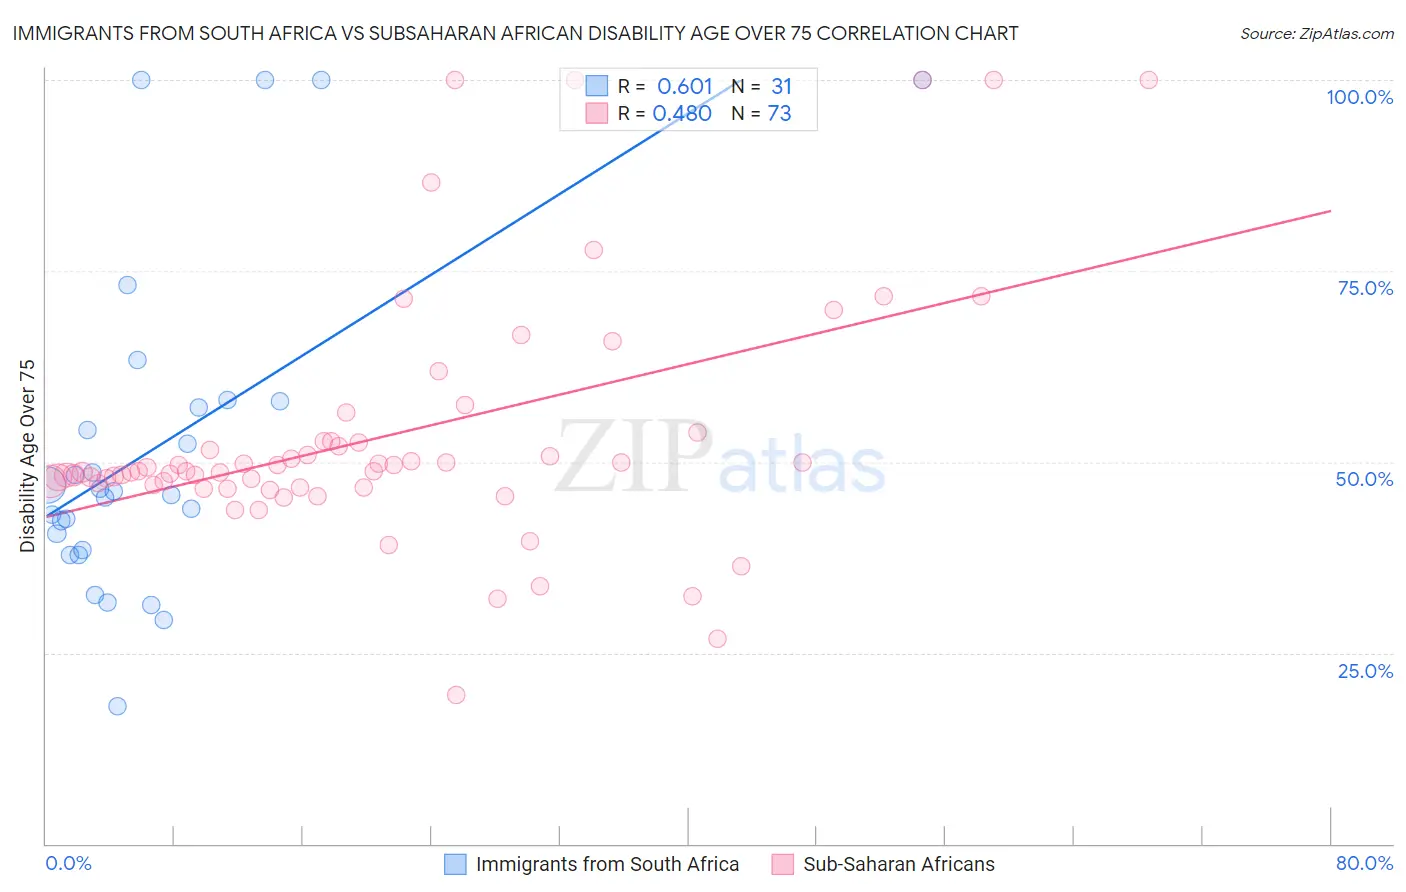 Immigrants from South Africa vs Subsaharan African Disability Age Over 75